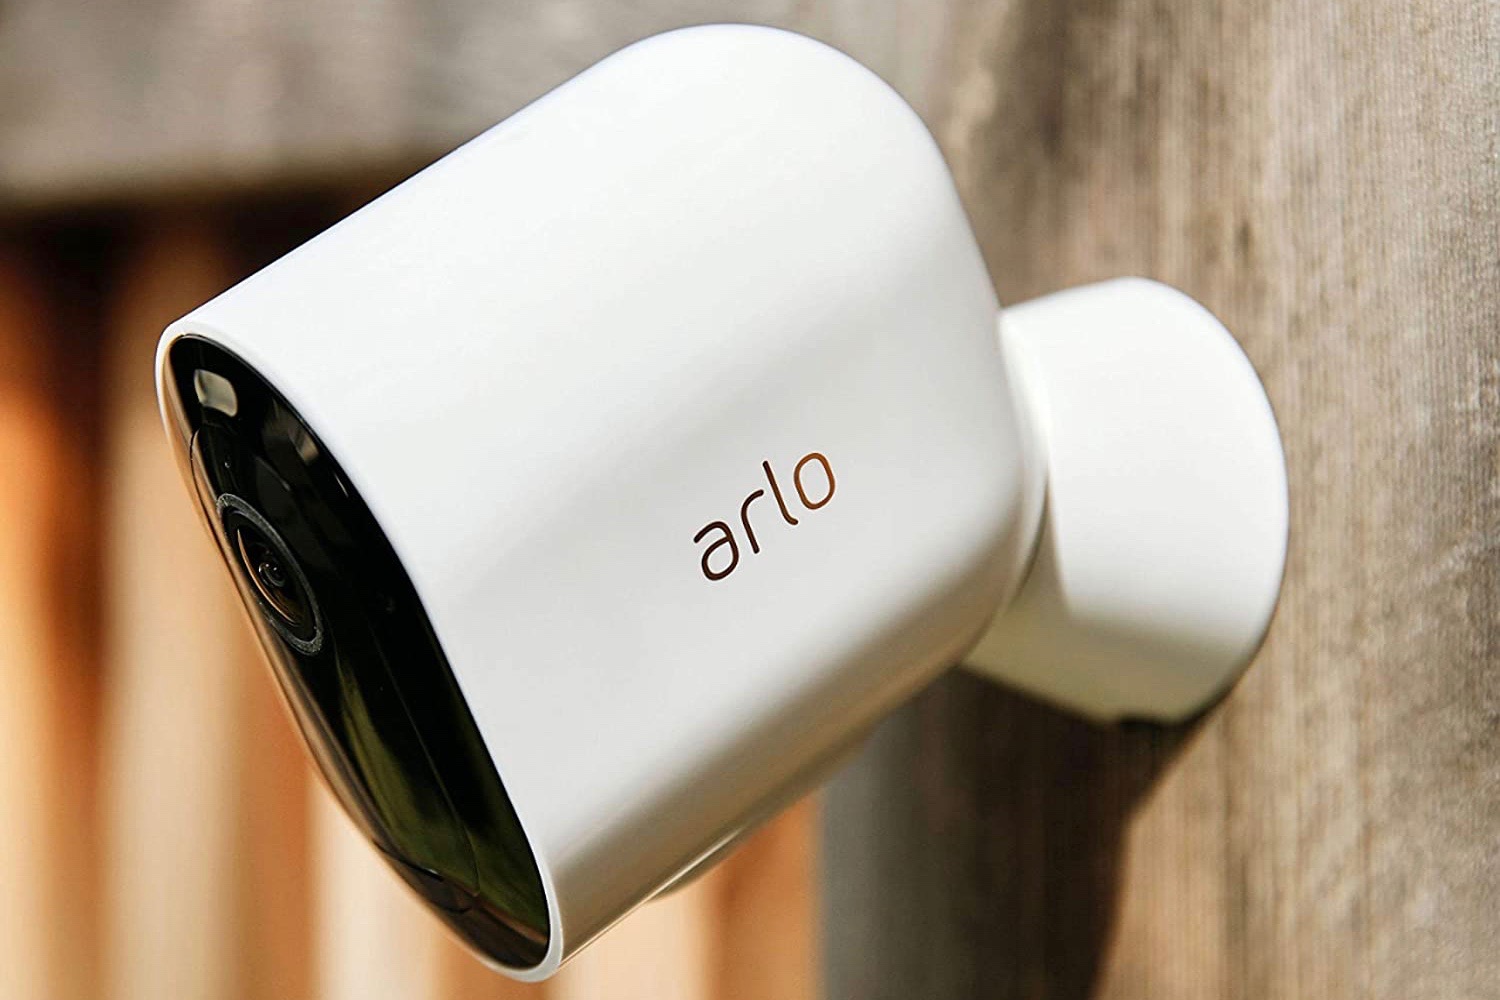 Best Arlo Cyber Monday deals Save on security cameras and bundles